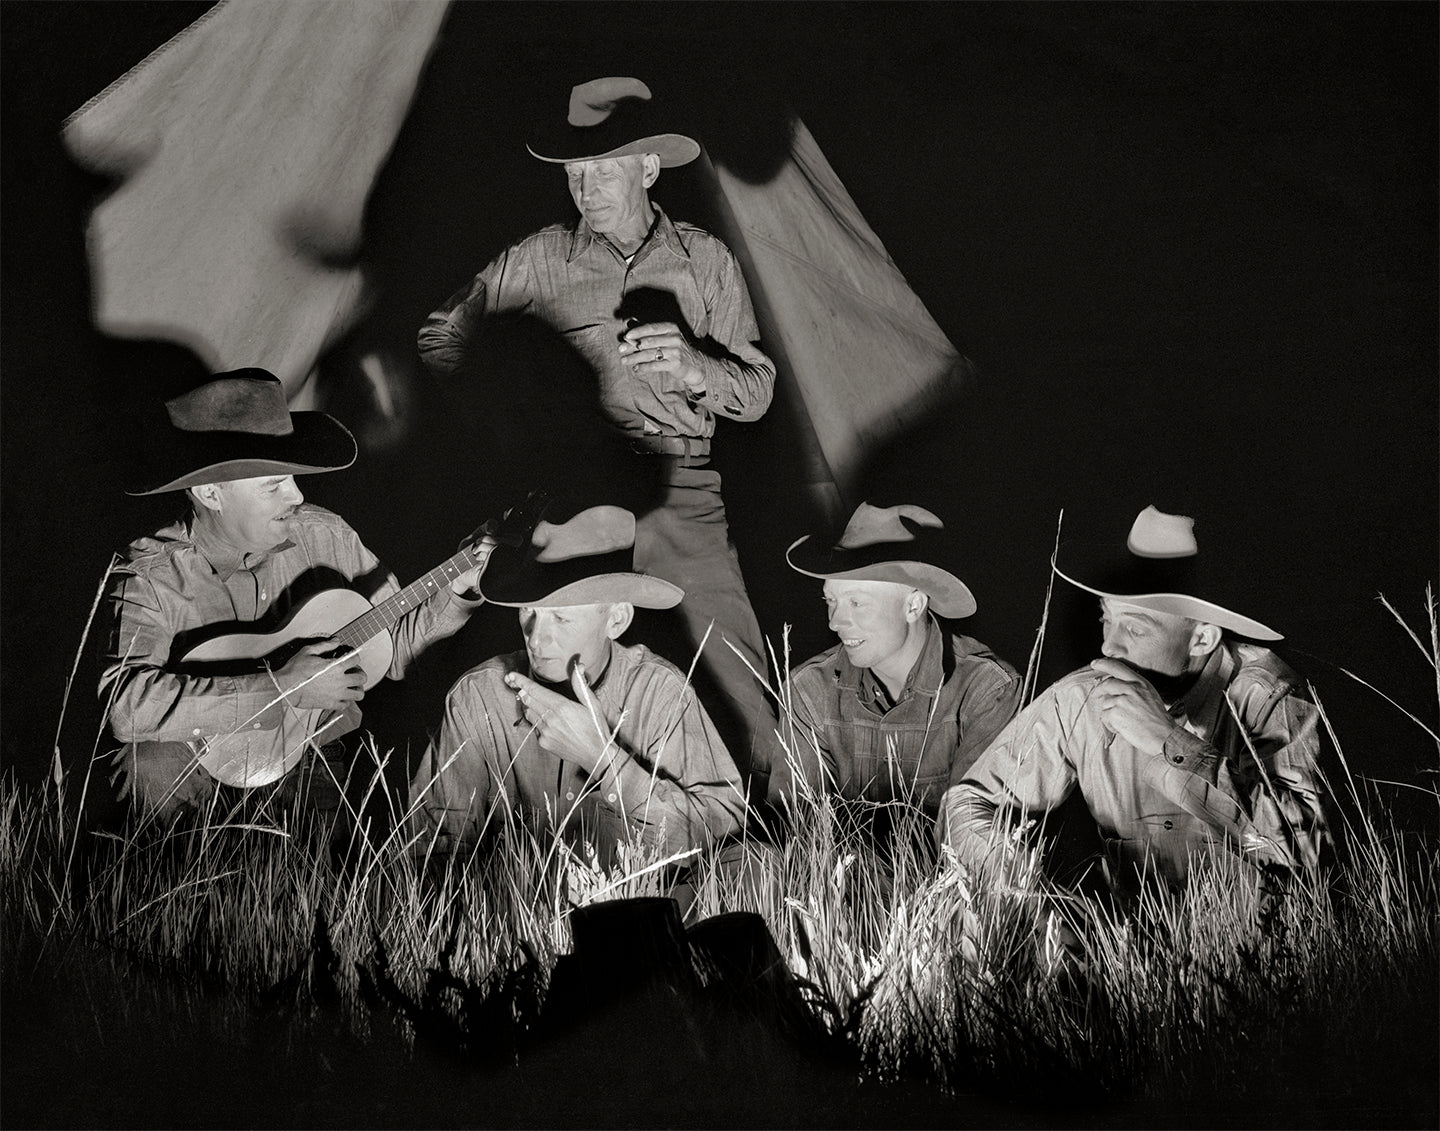 Cowboys Play Music To Pass The Night, 1939 Historical Pix